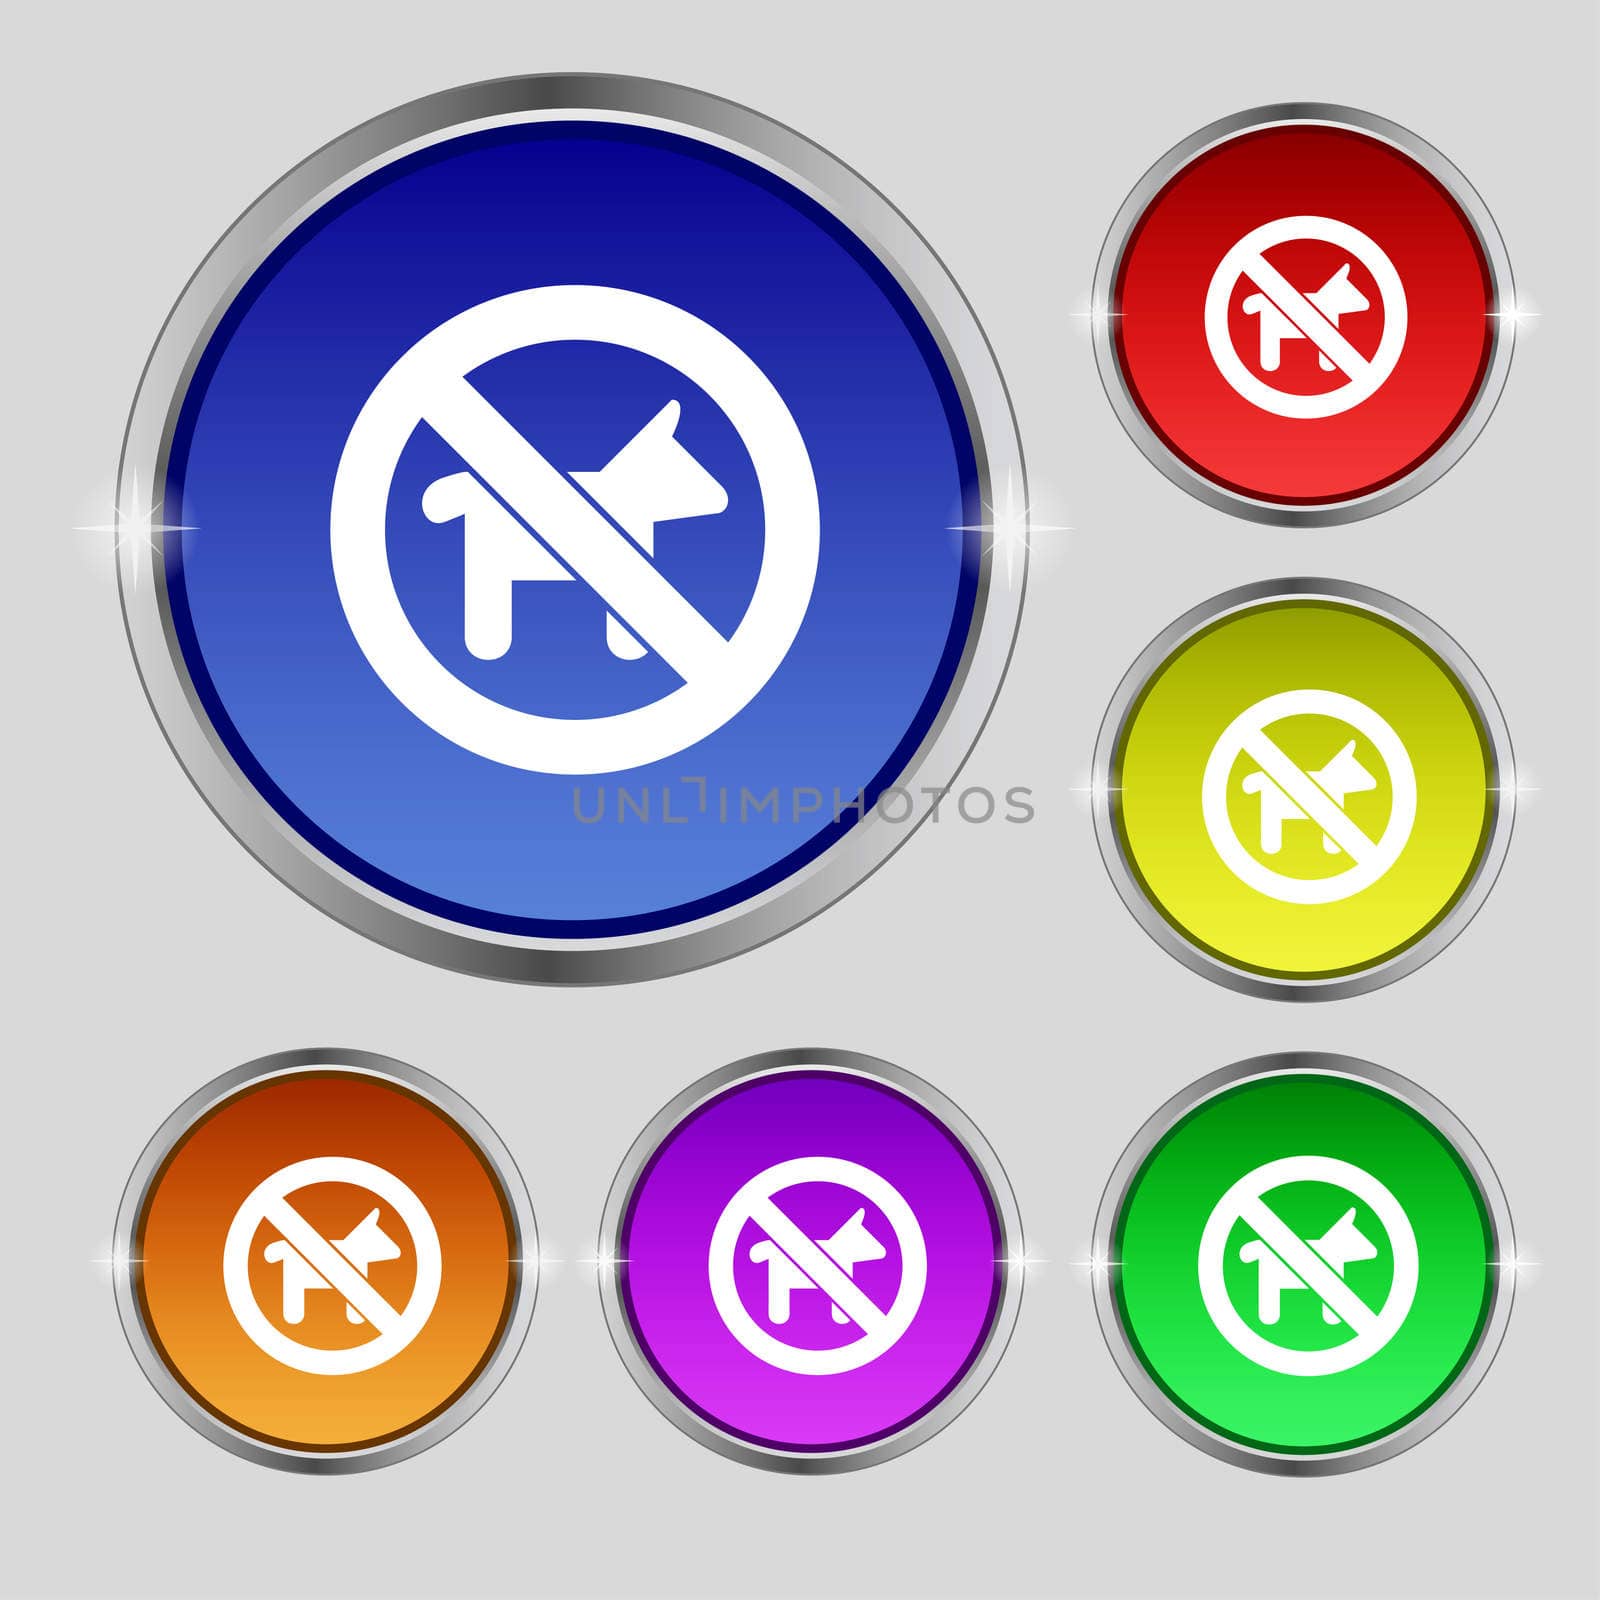 dog walking is prohibited icon sign. Round symbol on bright colourful buttons.  by serhii_lohvyniuk